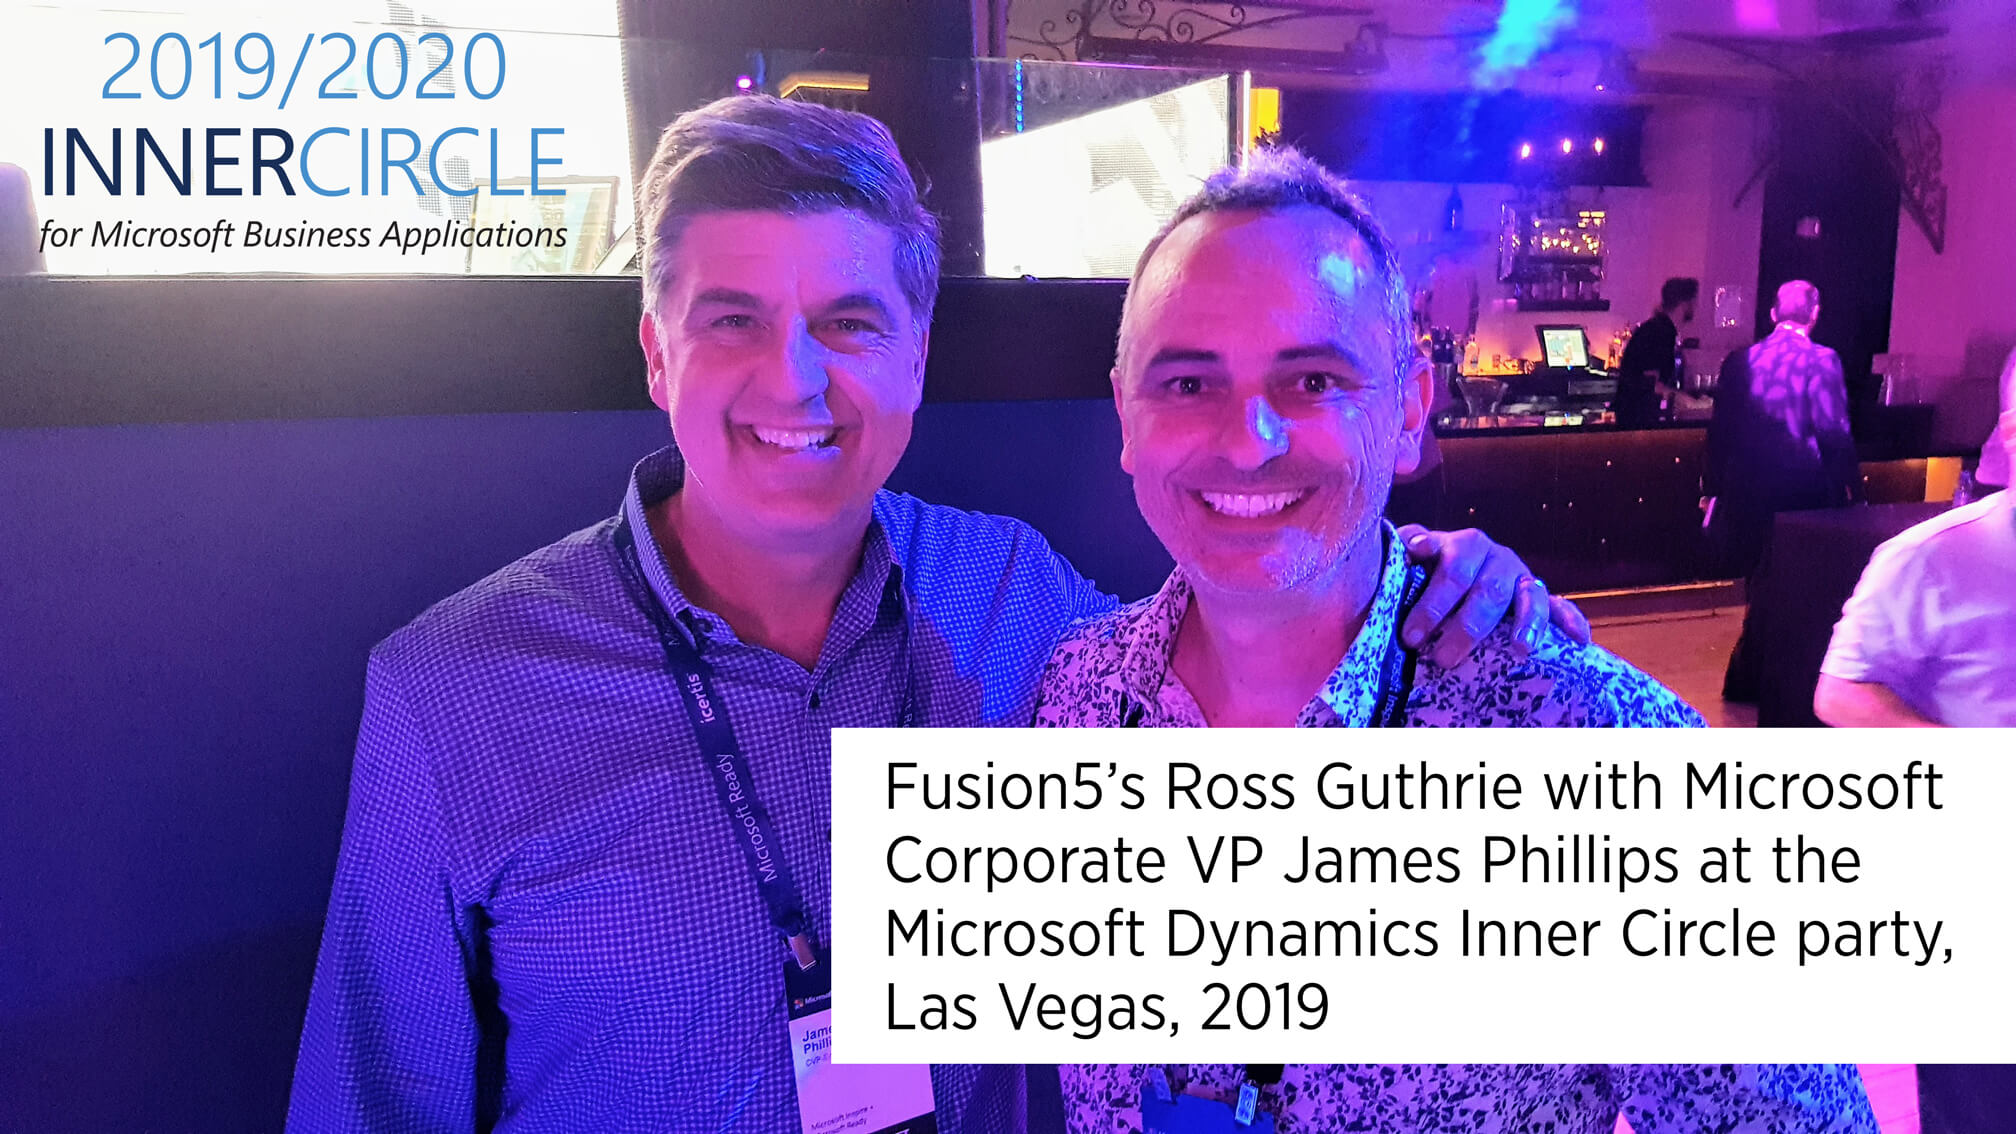 Fusion5's Ross Guthrie with Microsoft Corporate VP James Phillips at the Microsoft Dynamics 365 Inner Circle party, Las Vegas 2019.